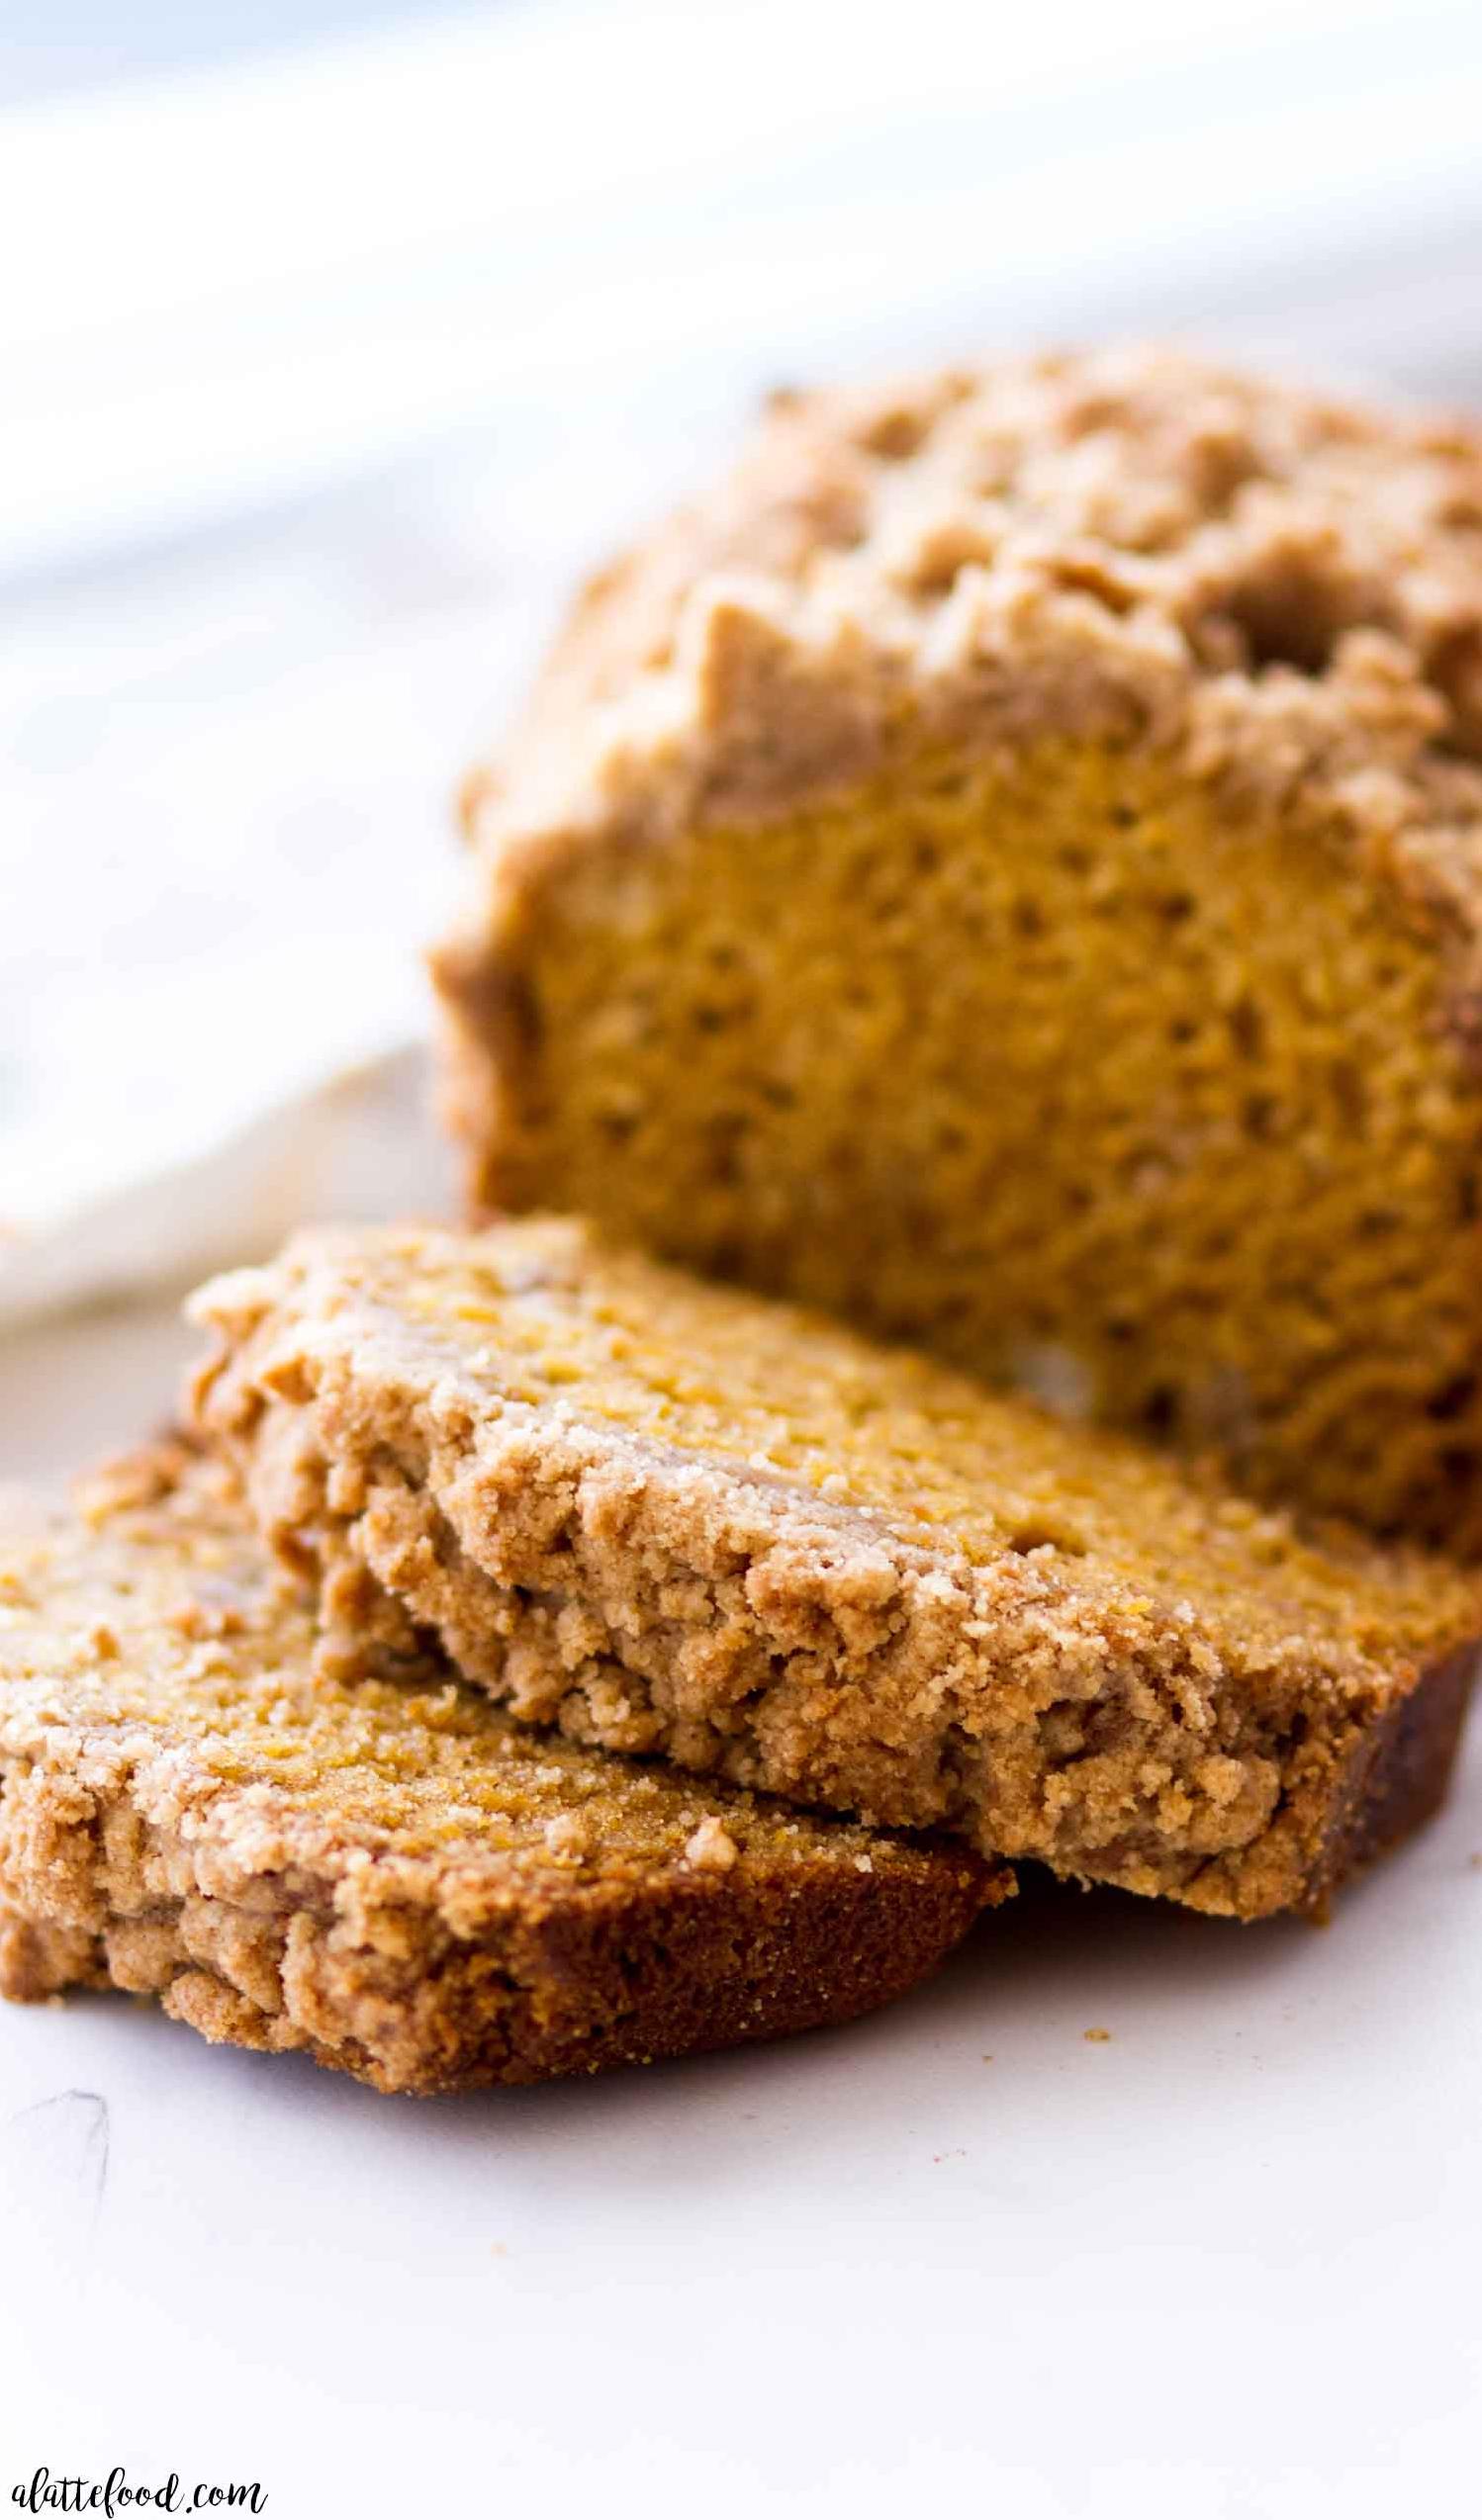  Fluffy and spiced to perfection, this pumpkin bread is a fall favorite